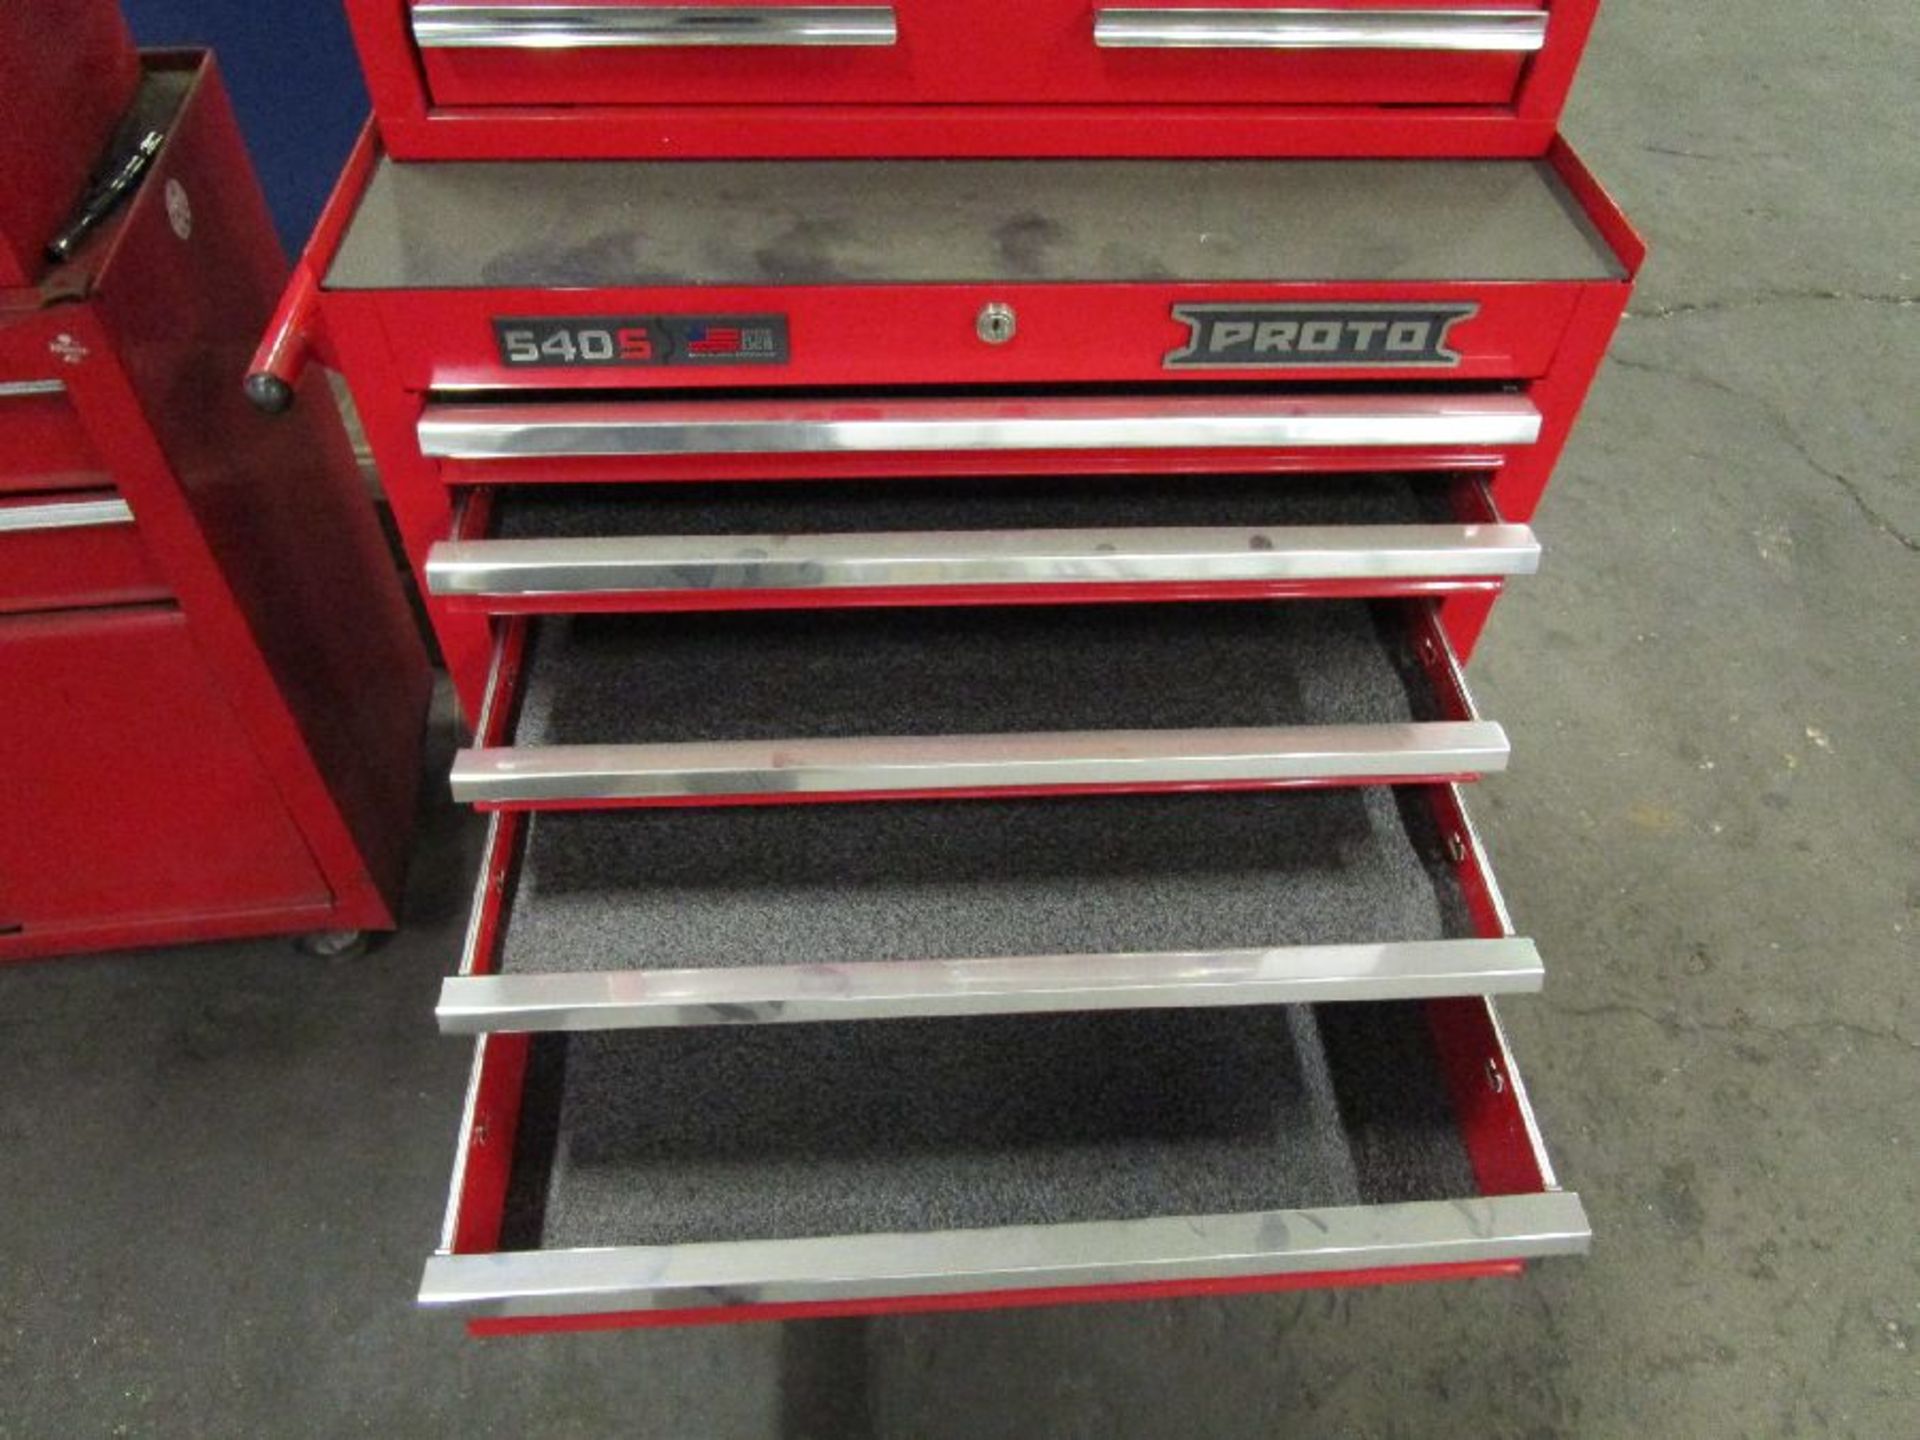 Proto Model 540S Rolling Tool Chest - Image 10 of 11